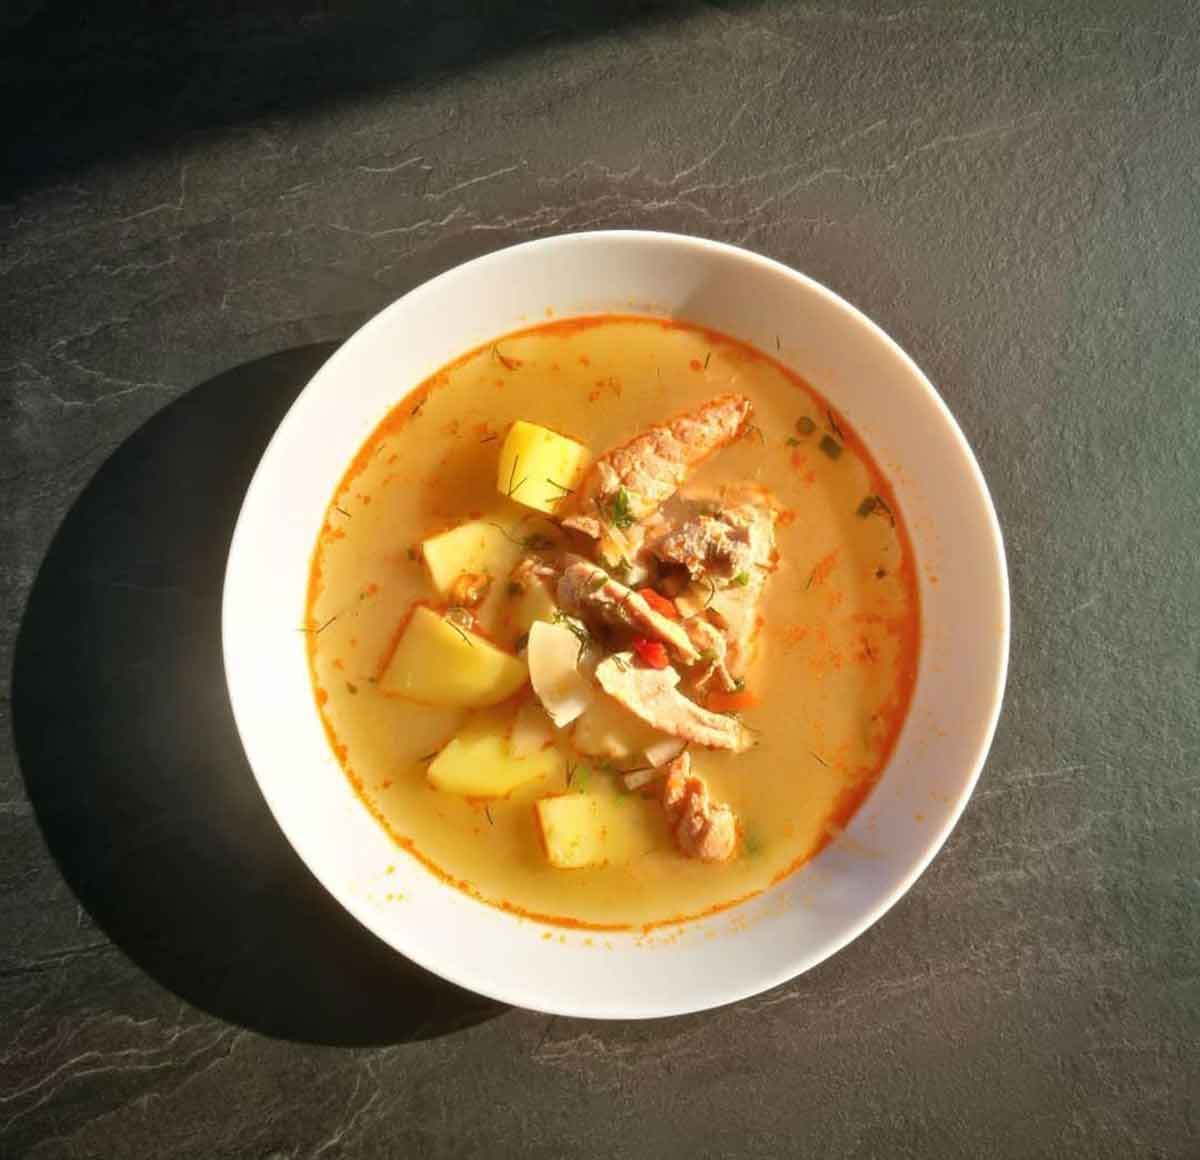 Soup with potatoes, smoked paprika and soy noodles